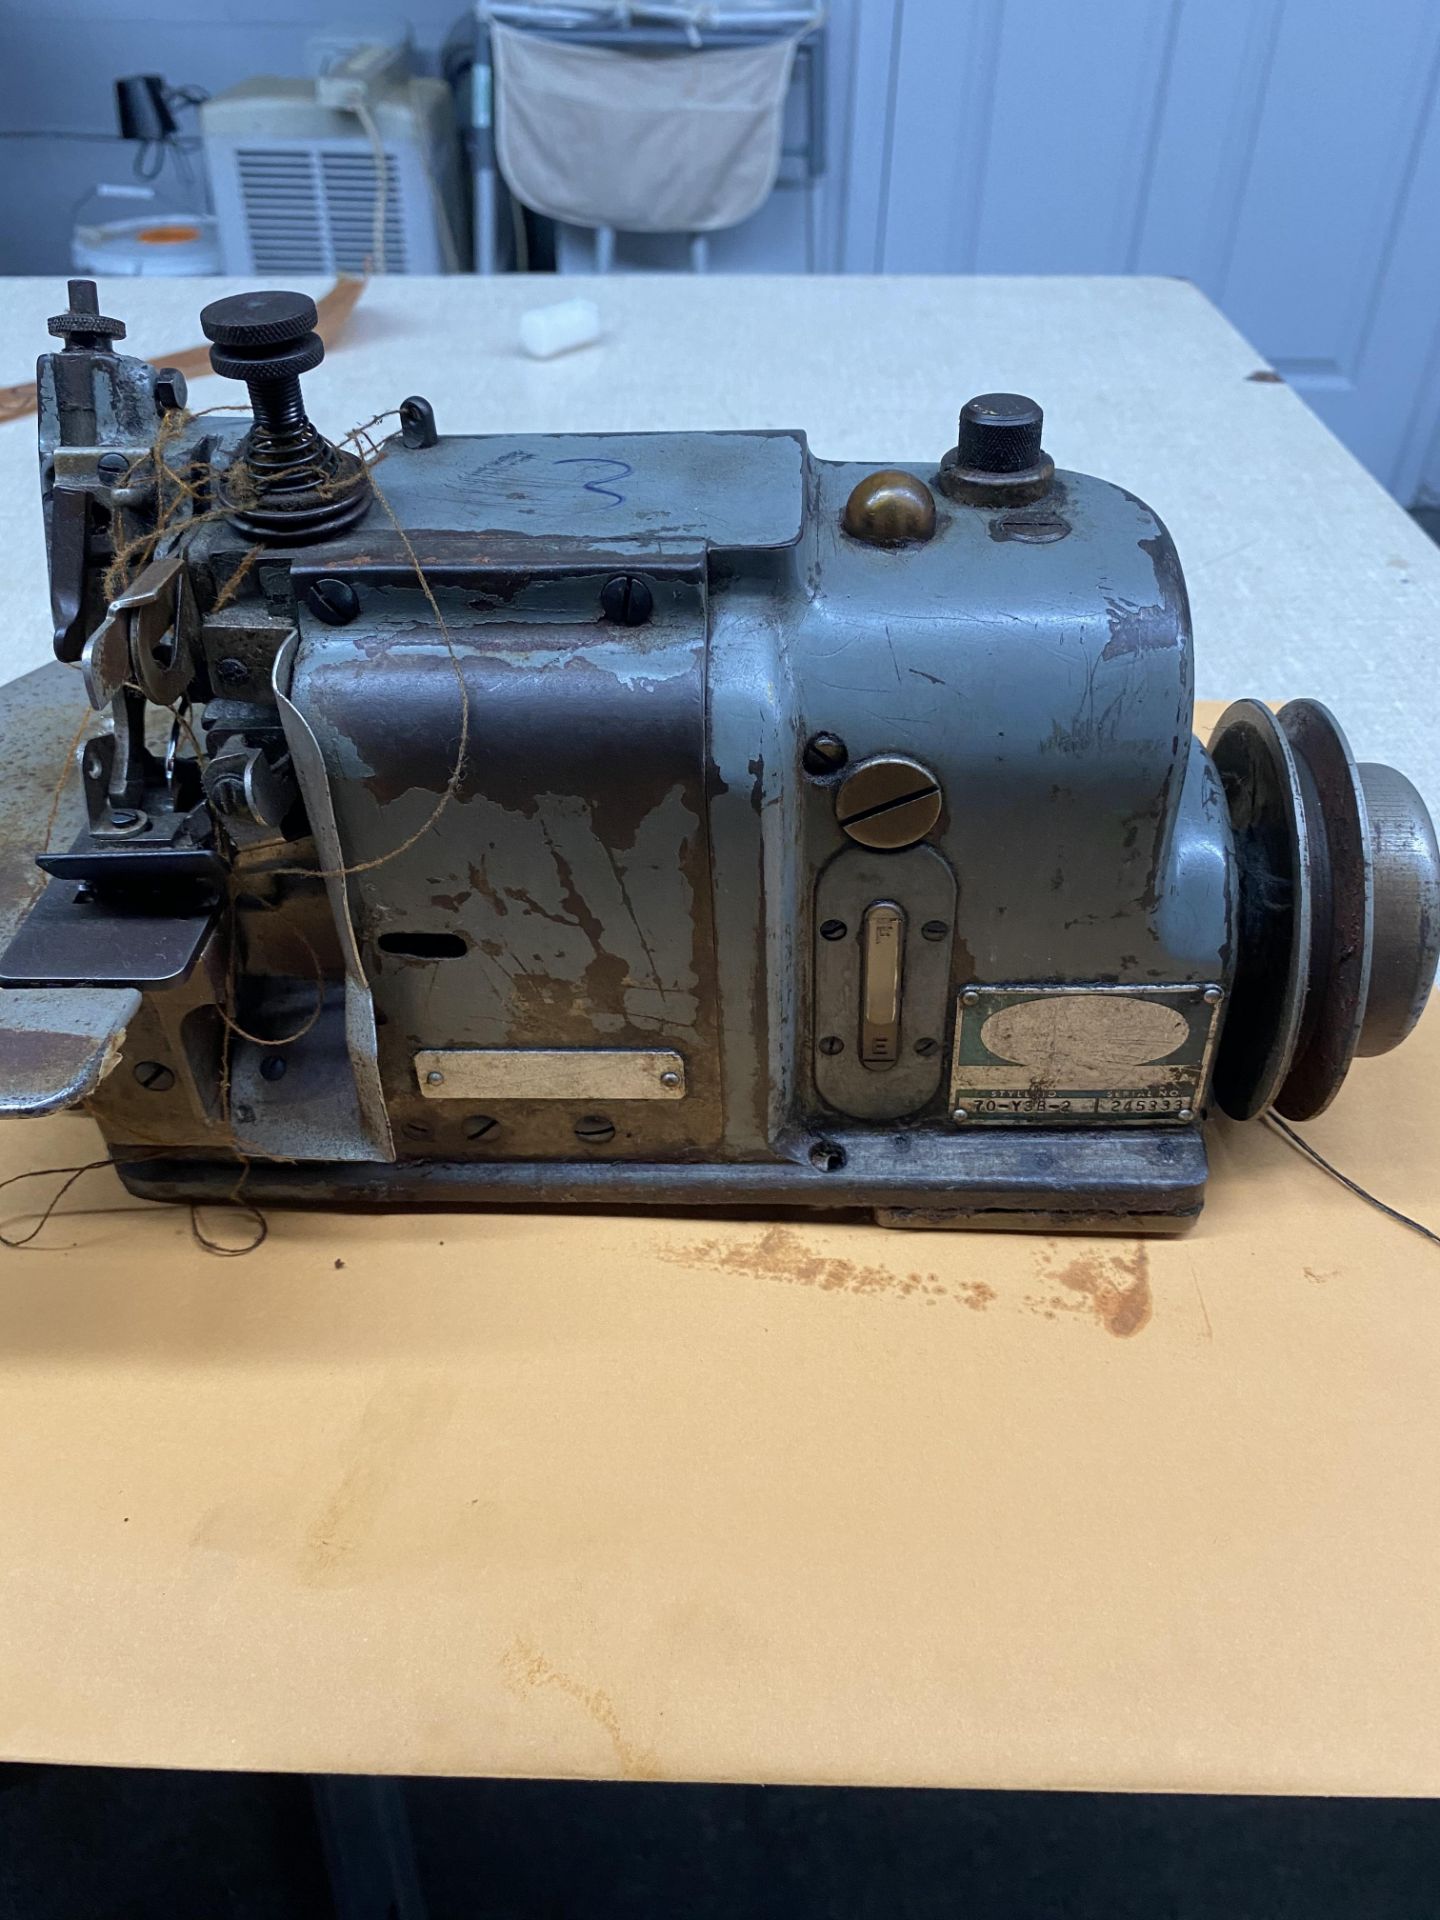 Merrow Sewing Machine, Model M3DW-2, mounted on a stand / table. RIGGING FEE $25 - Packaging not